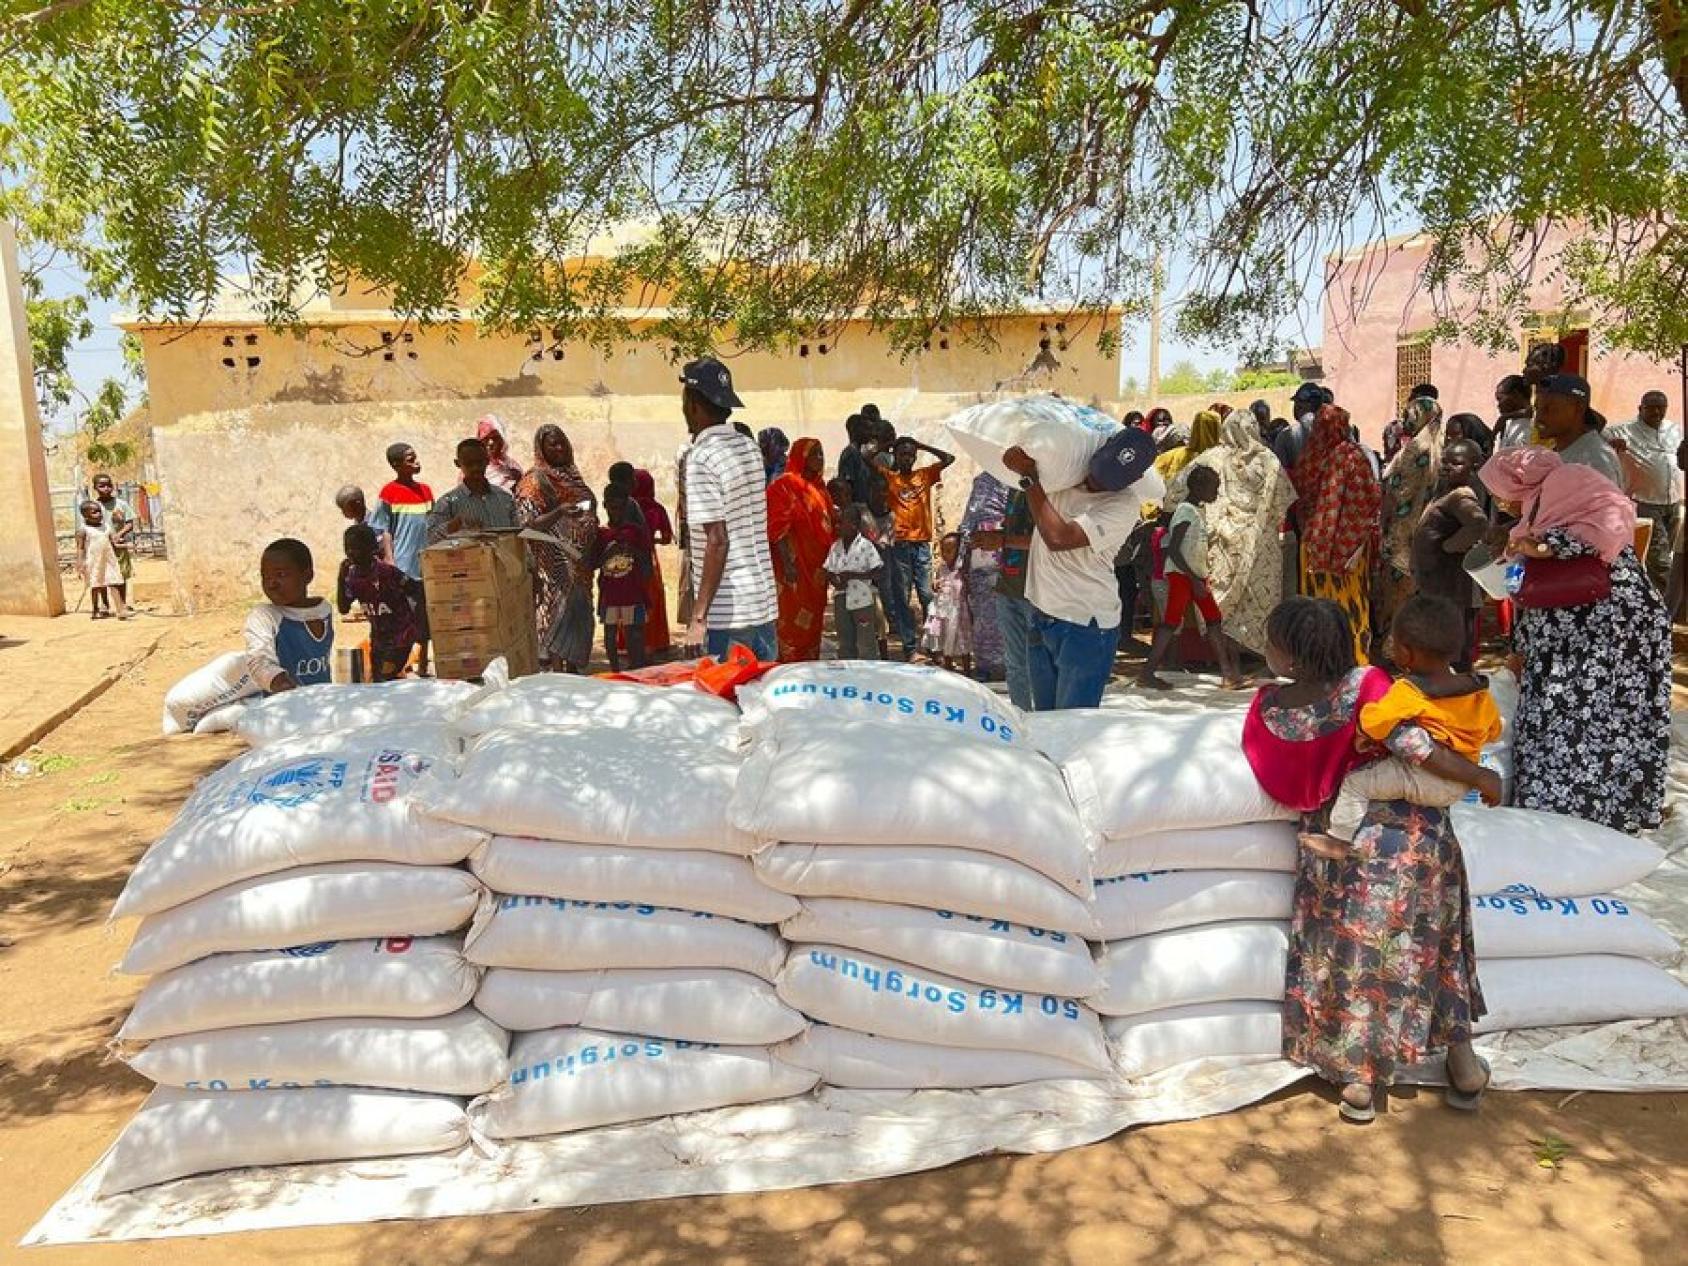 Group of people gather around a stack of numerous bags of grain in Sudan